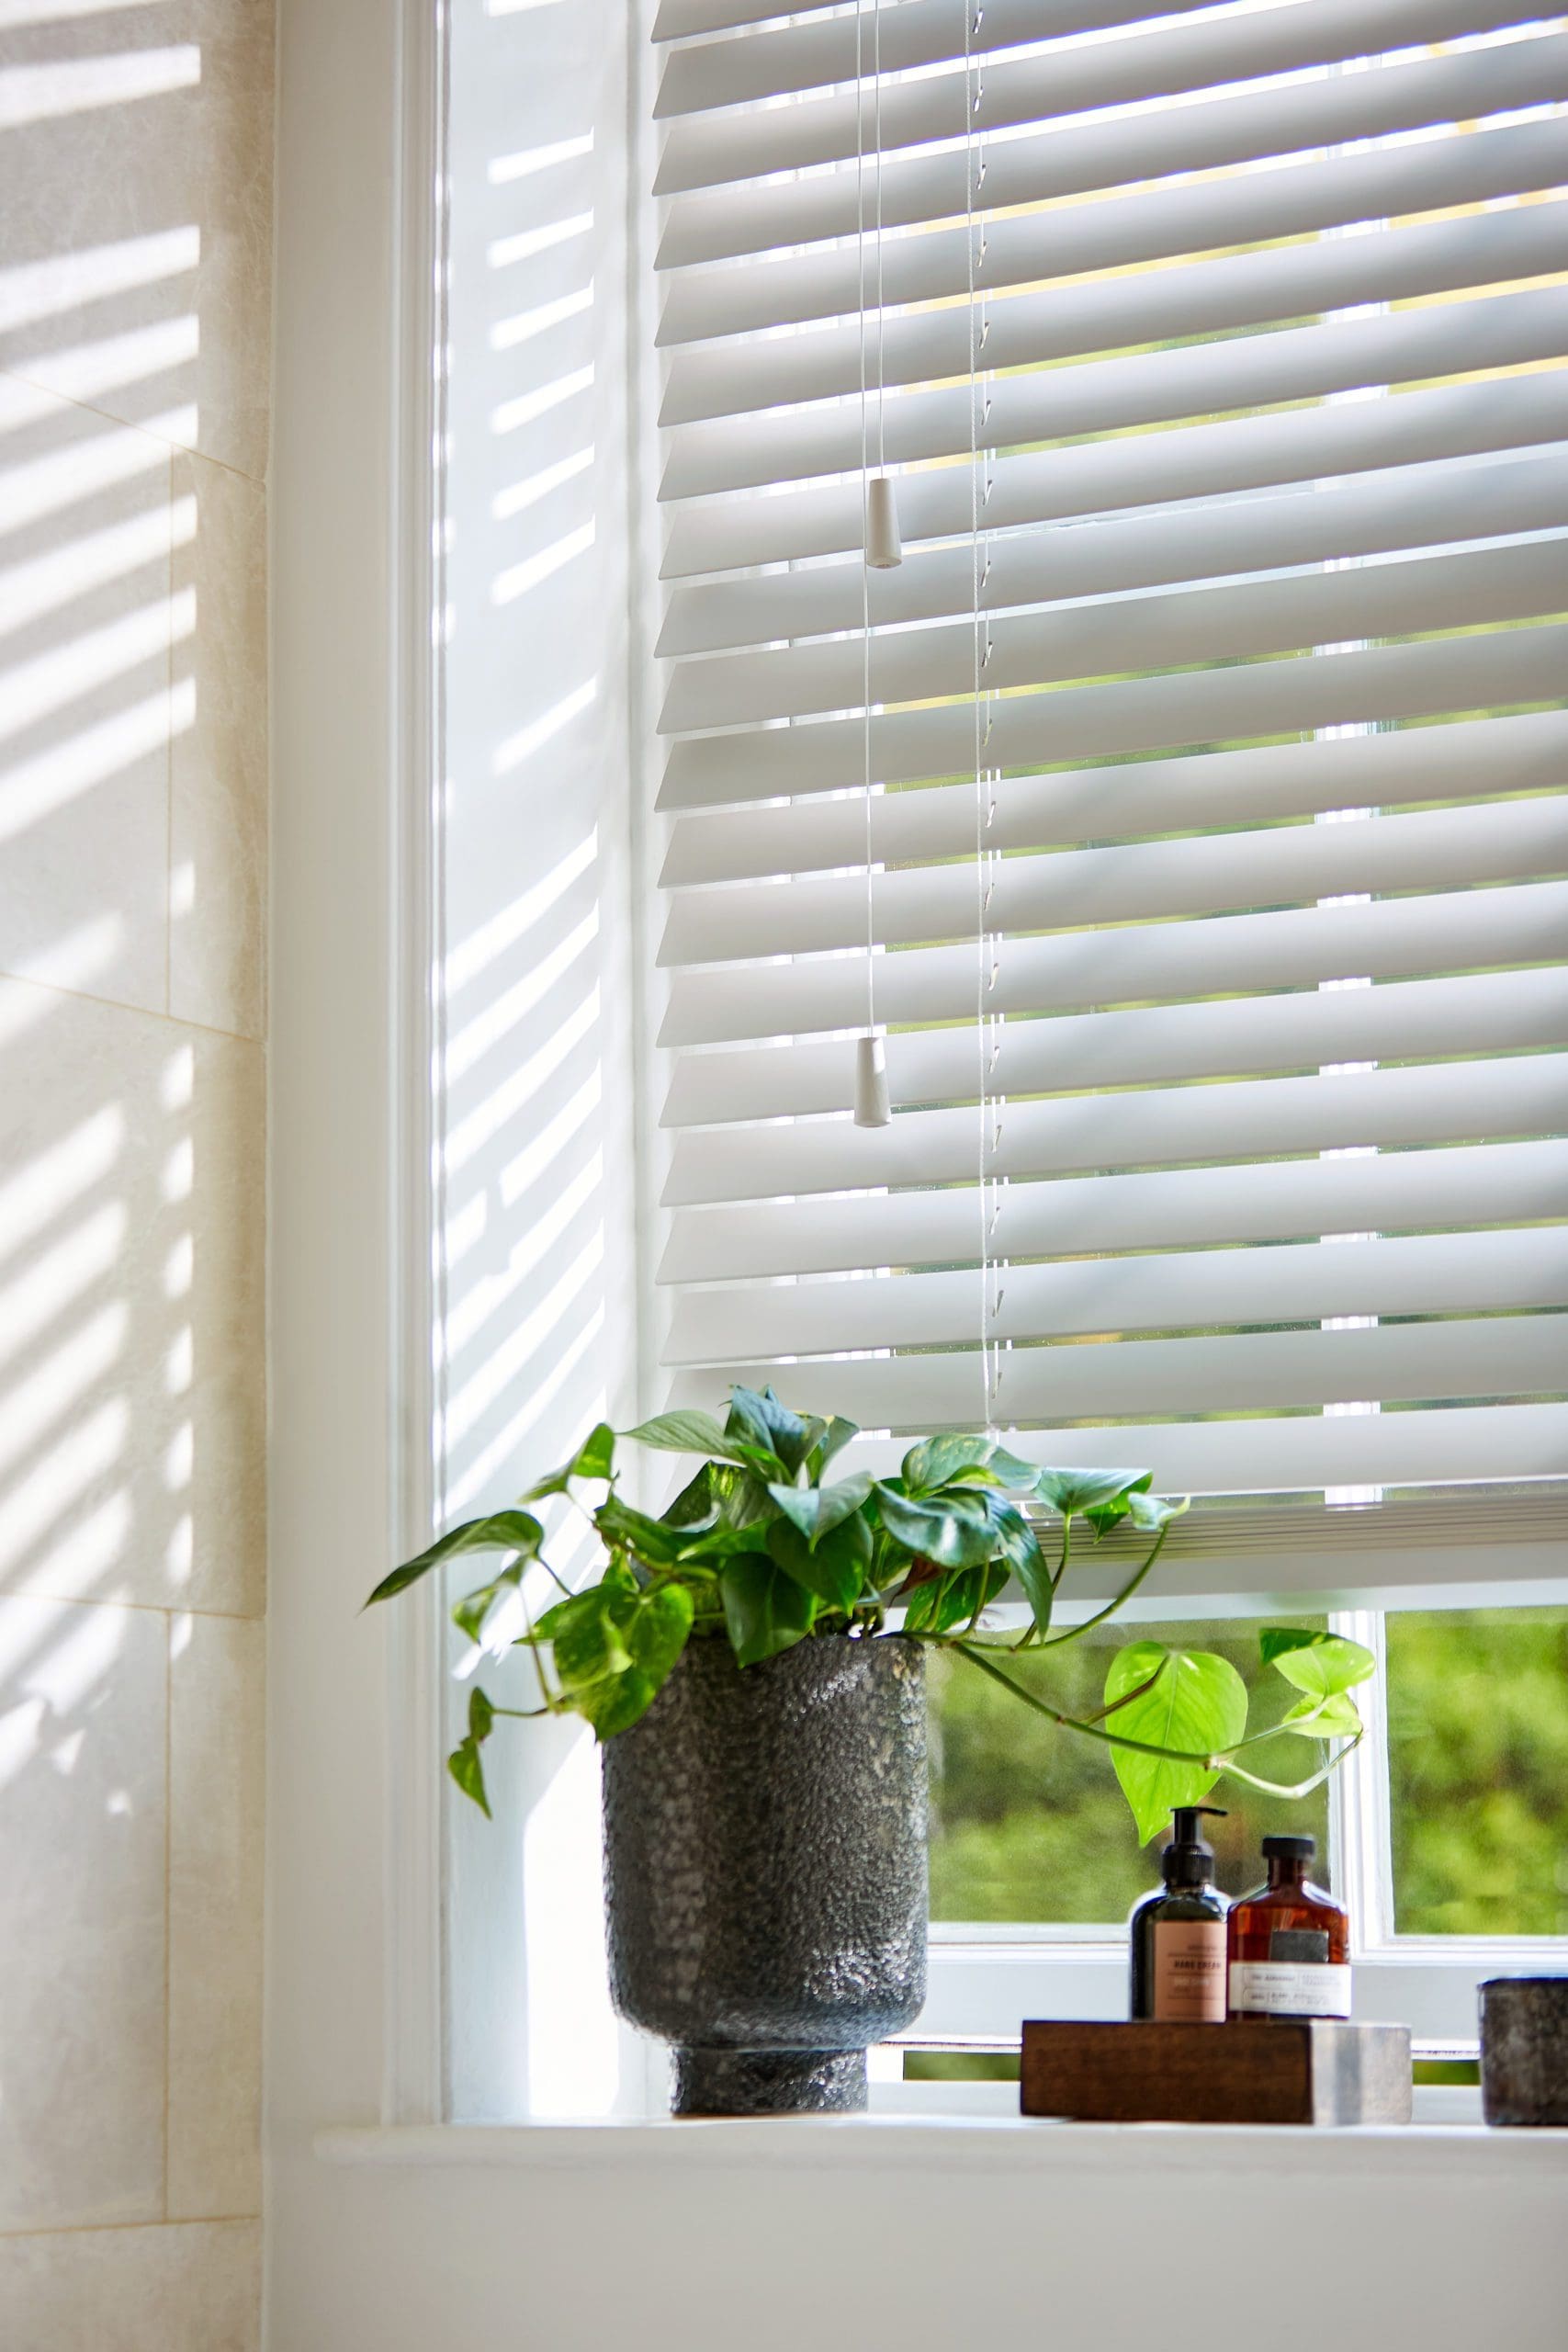 how to clean wooden blinds